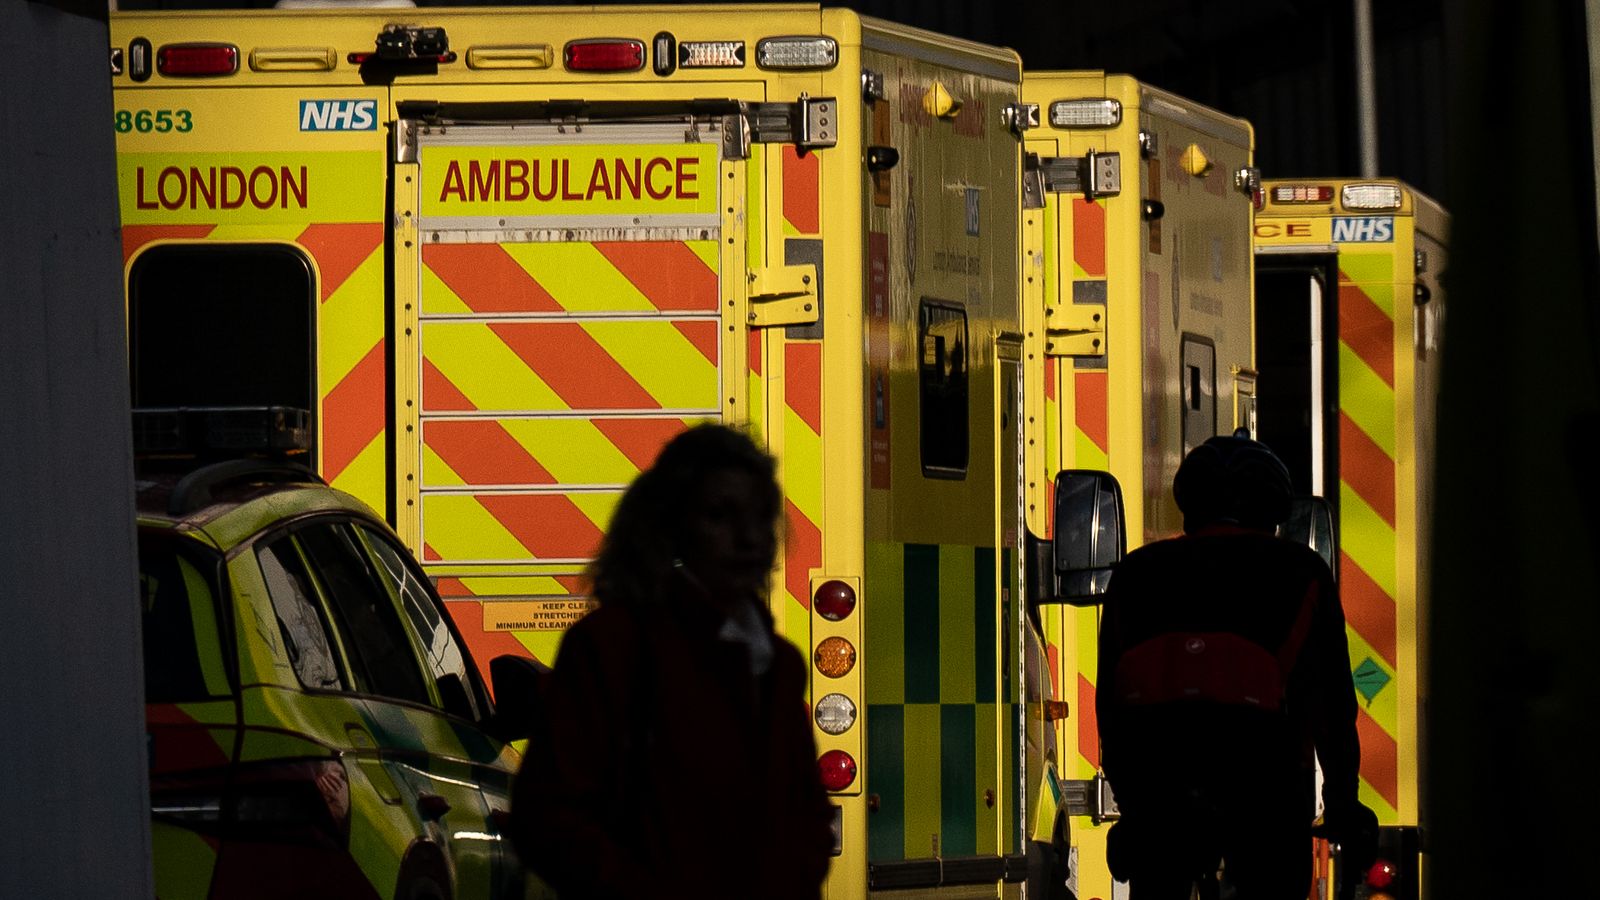 'Matter of national shame': Almost 400,000 patients spend 24 hours or more in A&E